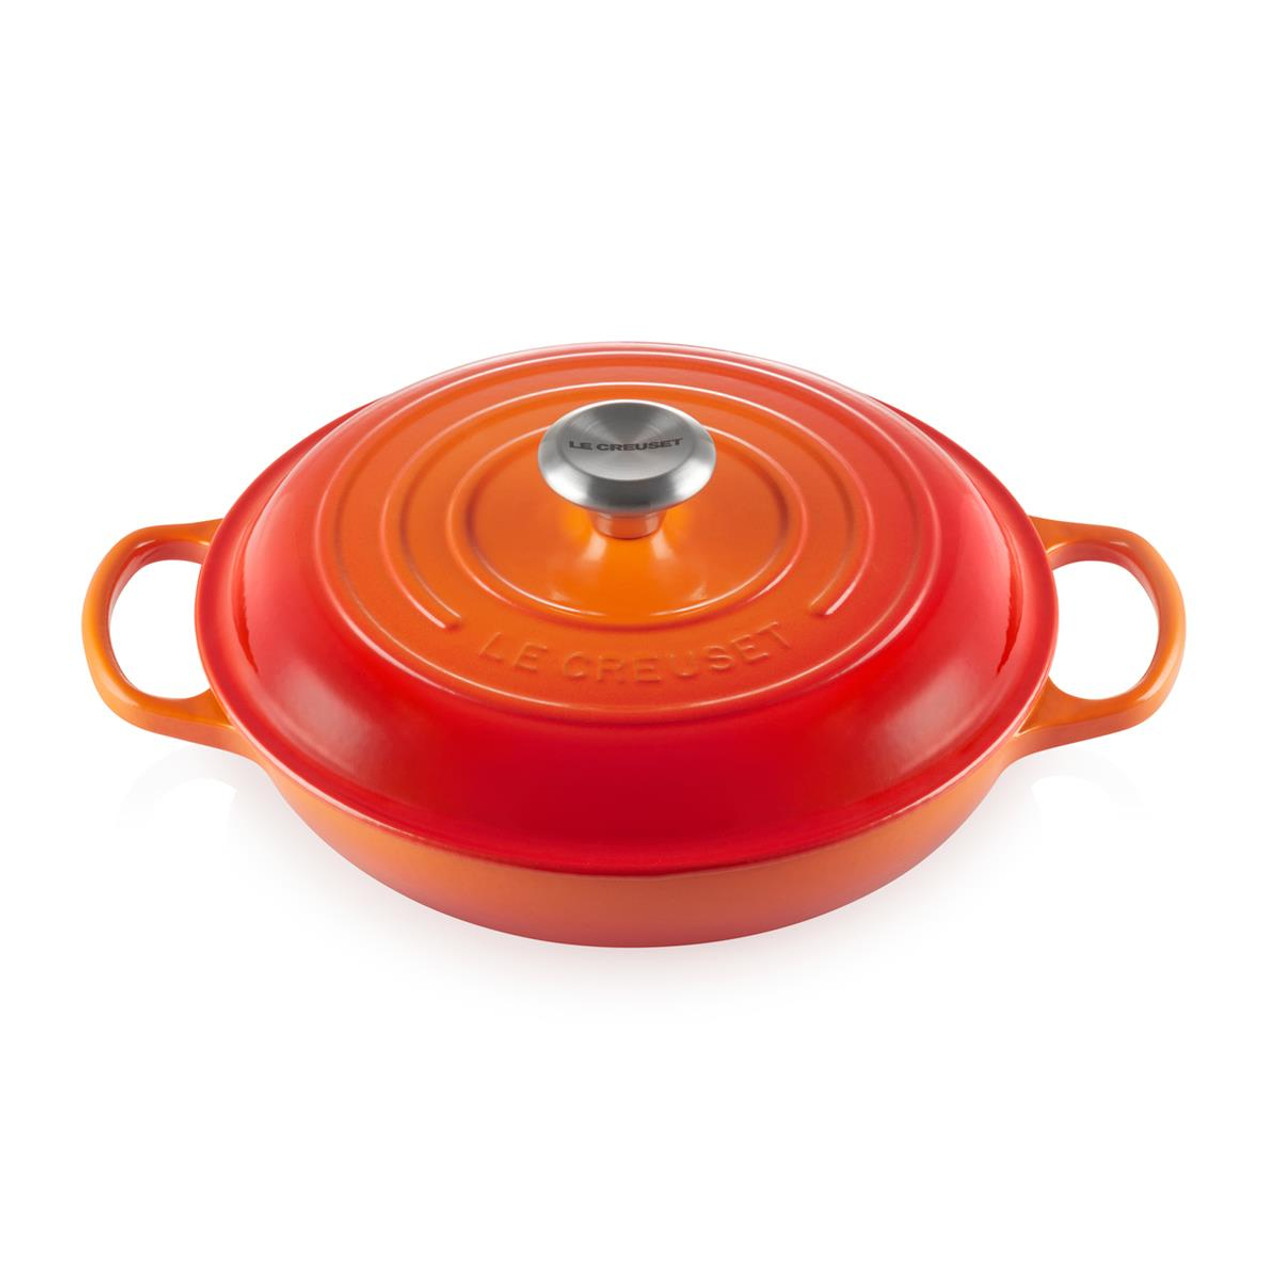 What does the cast iron material guarantee in the Le Creuset 26cm cast iron casserole dish?